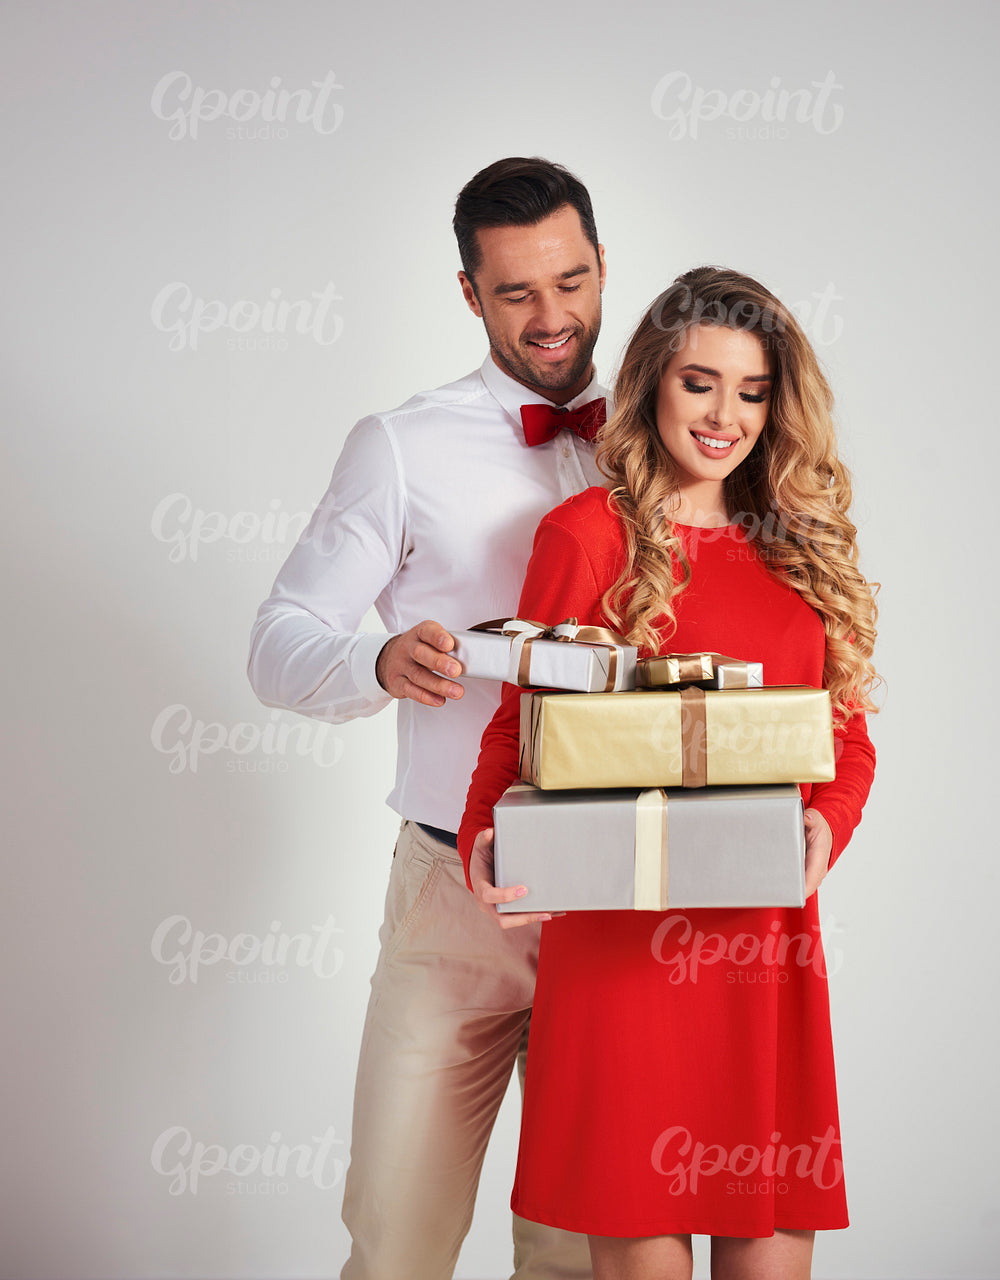 Elegant man giving woman the gifts